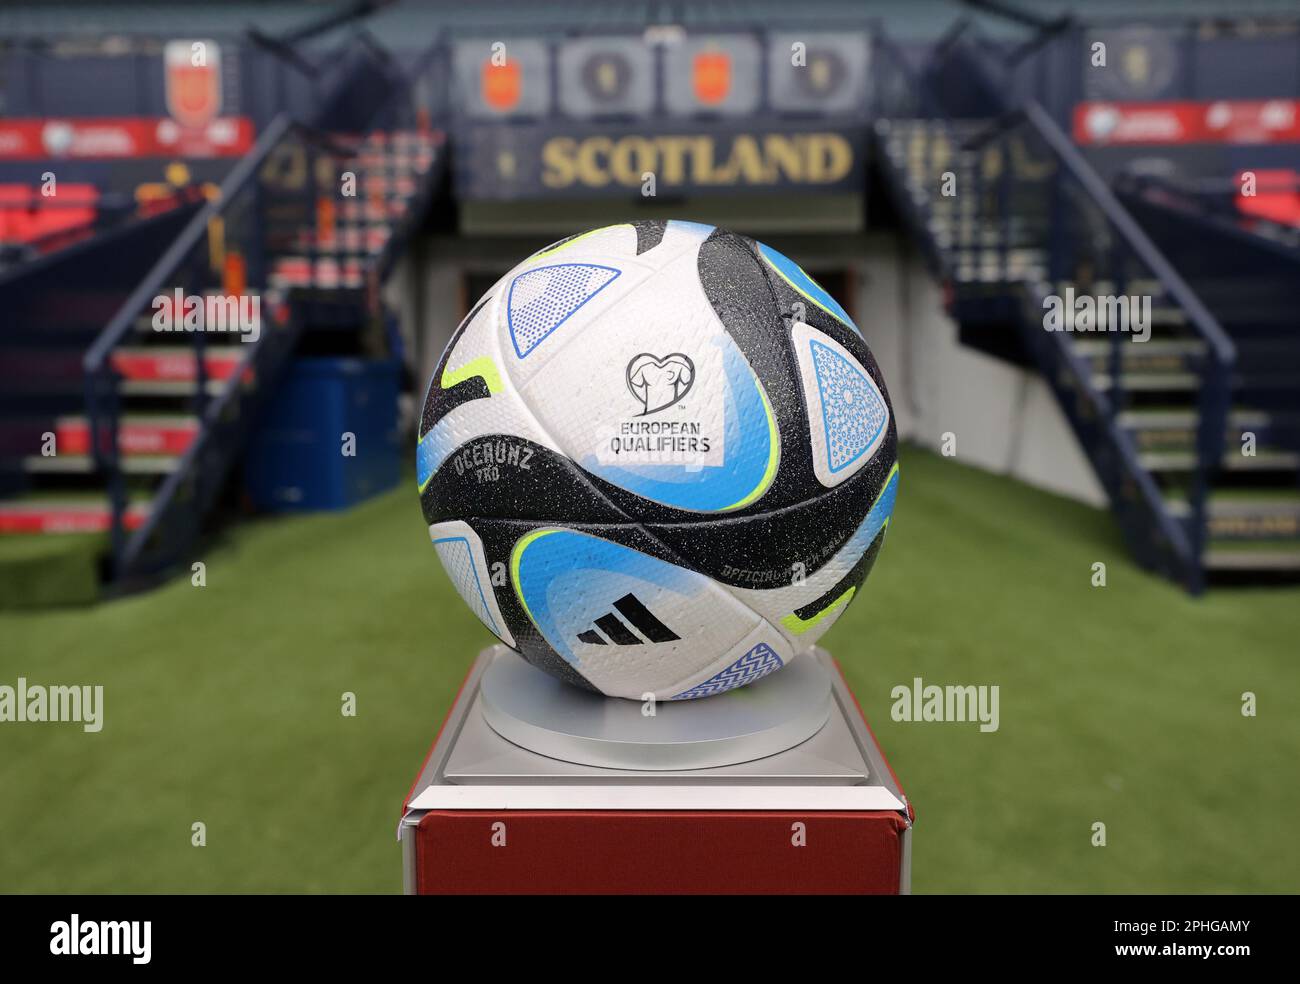 A General View Of An Adidas Match Ball Ahead Of The Uefa Euro 2024 Qualifying Group A Match At Hampden Park Glasgow Picture Date Tuesday March 28 2023 2PHGAMY 